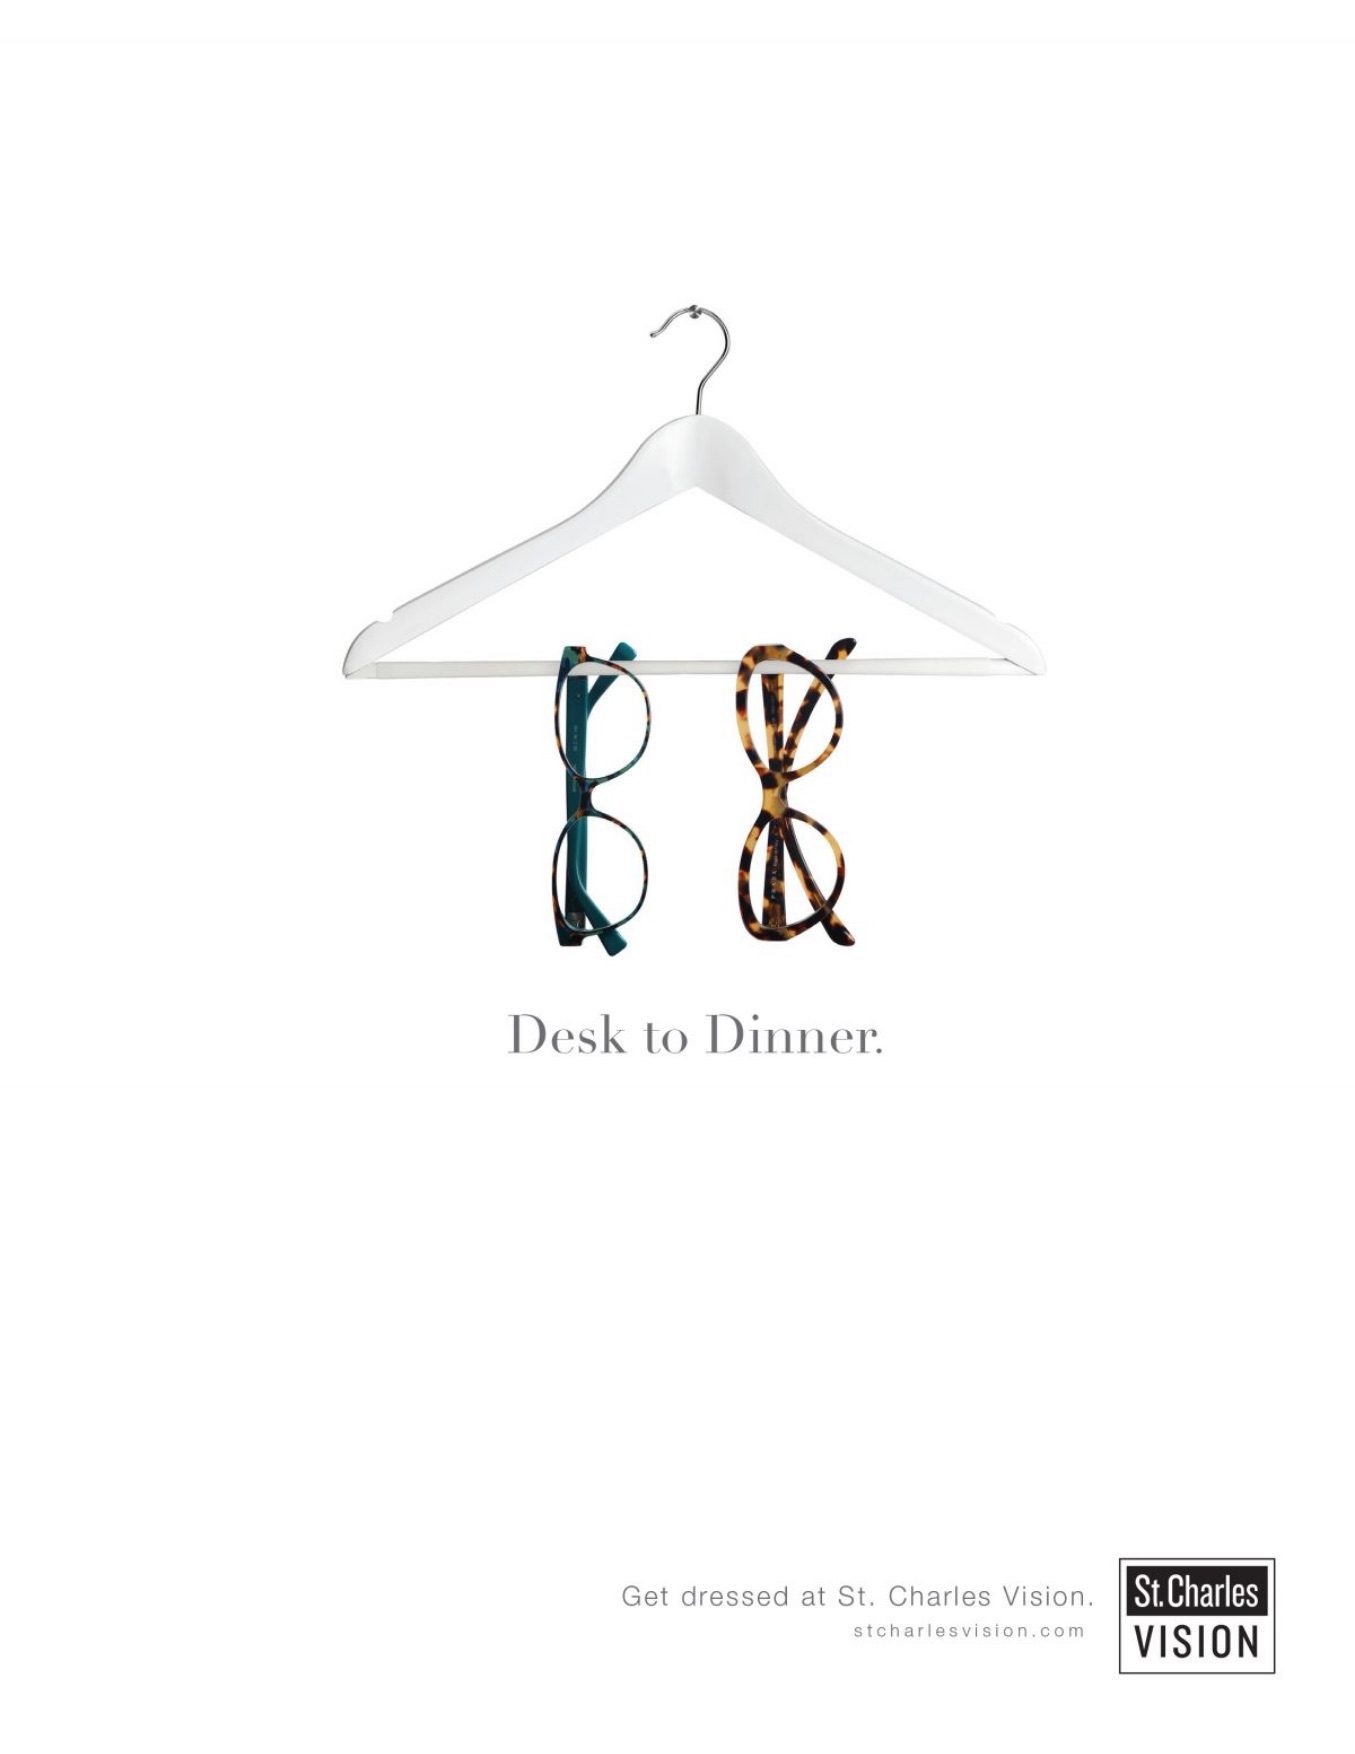 ad for eye glasses which depicts two pairs of eye glasses hung on a hanger against a white background